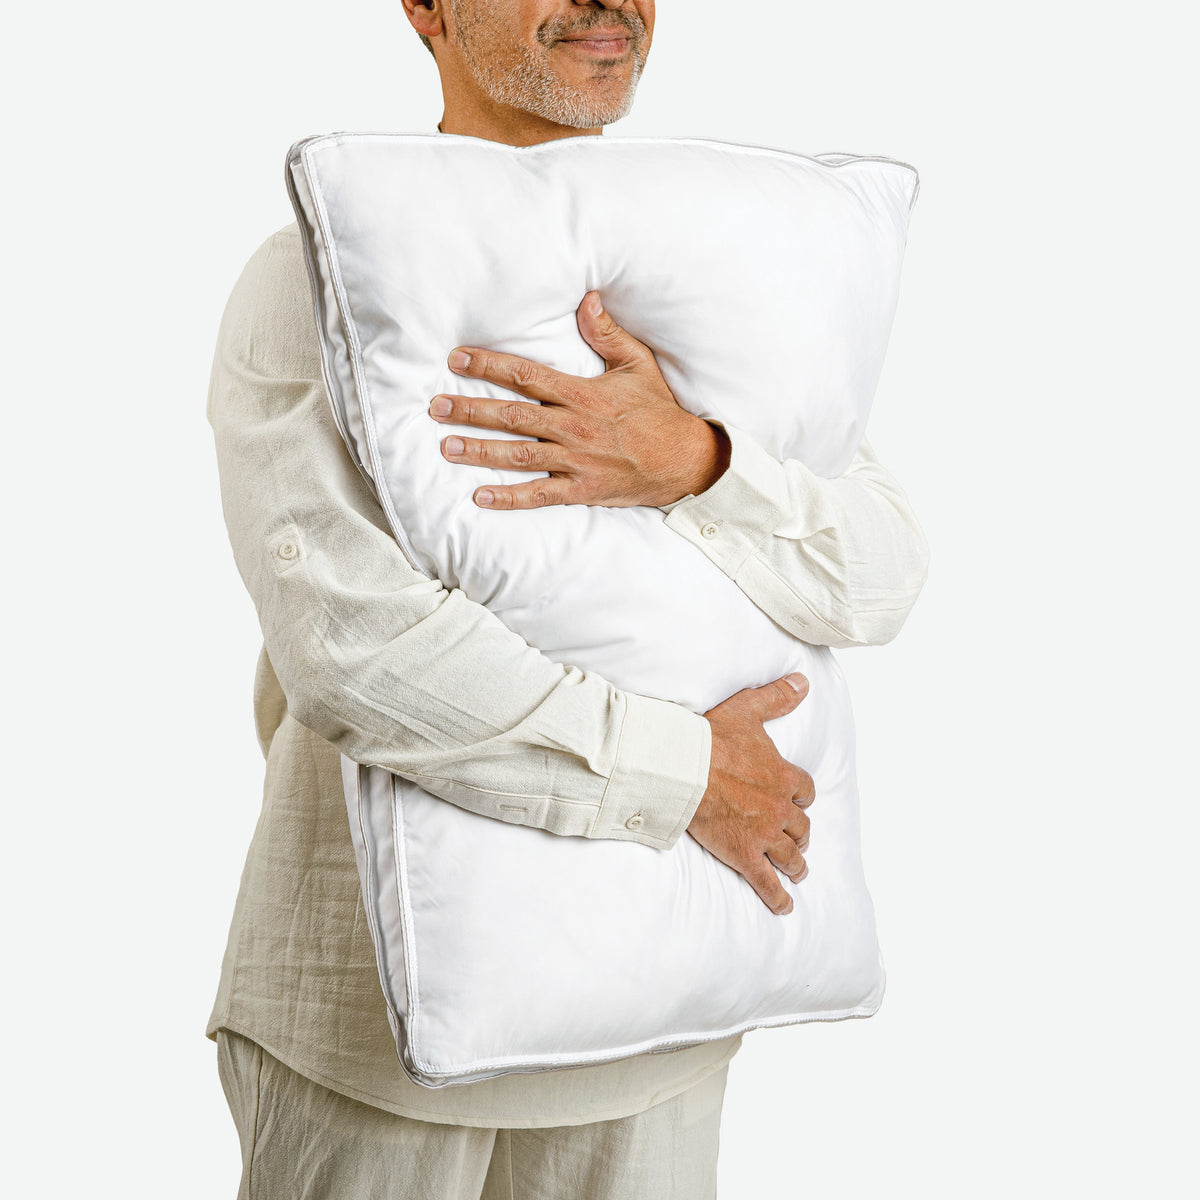 Image of a smiling man facing slightly to the right and hugging the Cooling Fiber Pillow against him